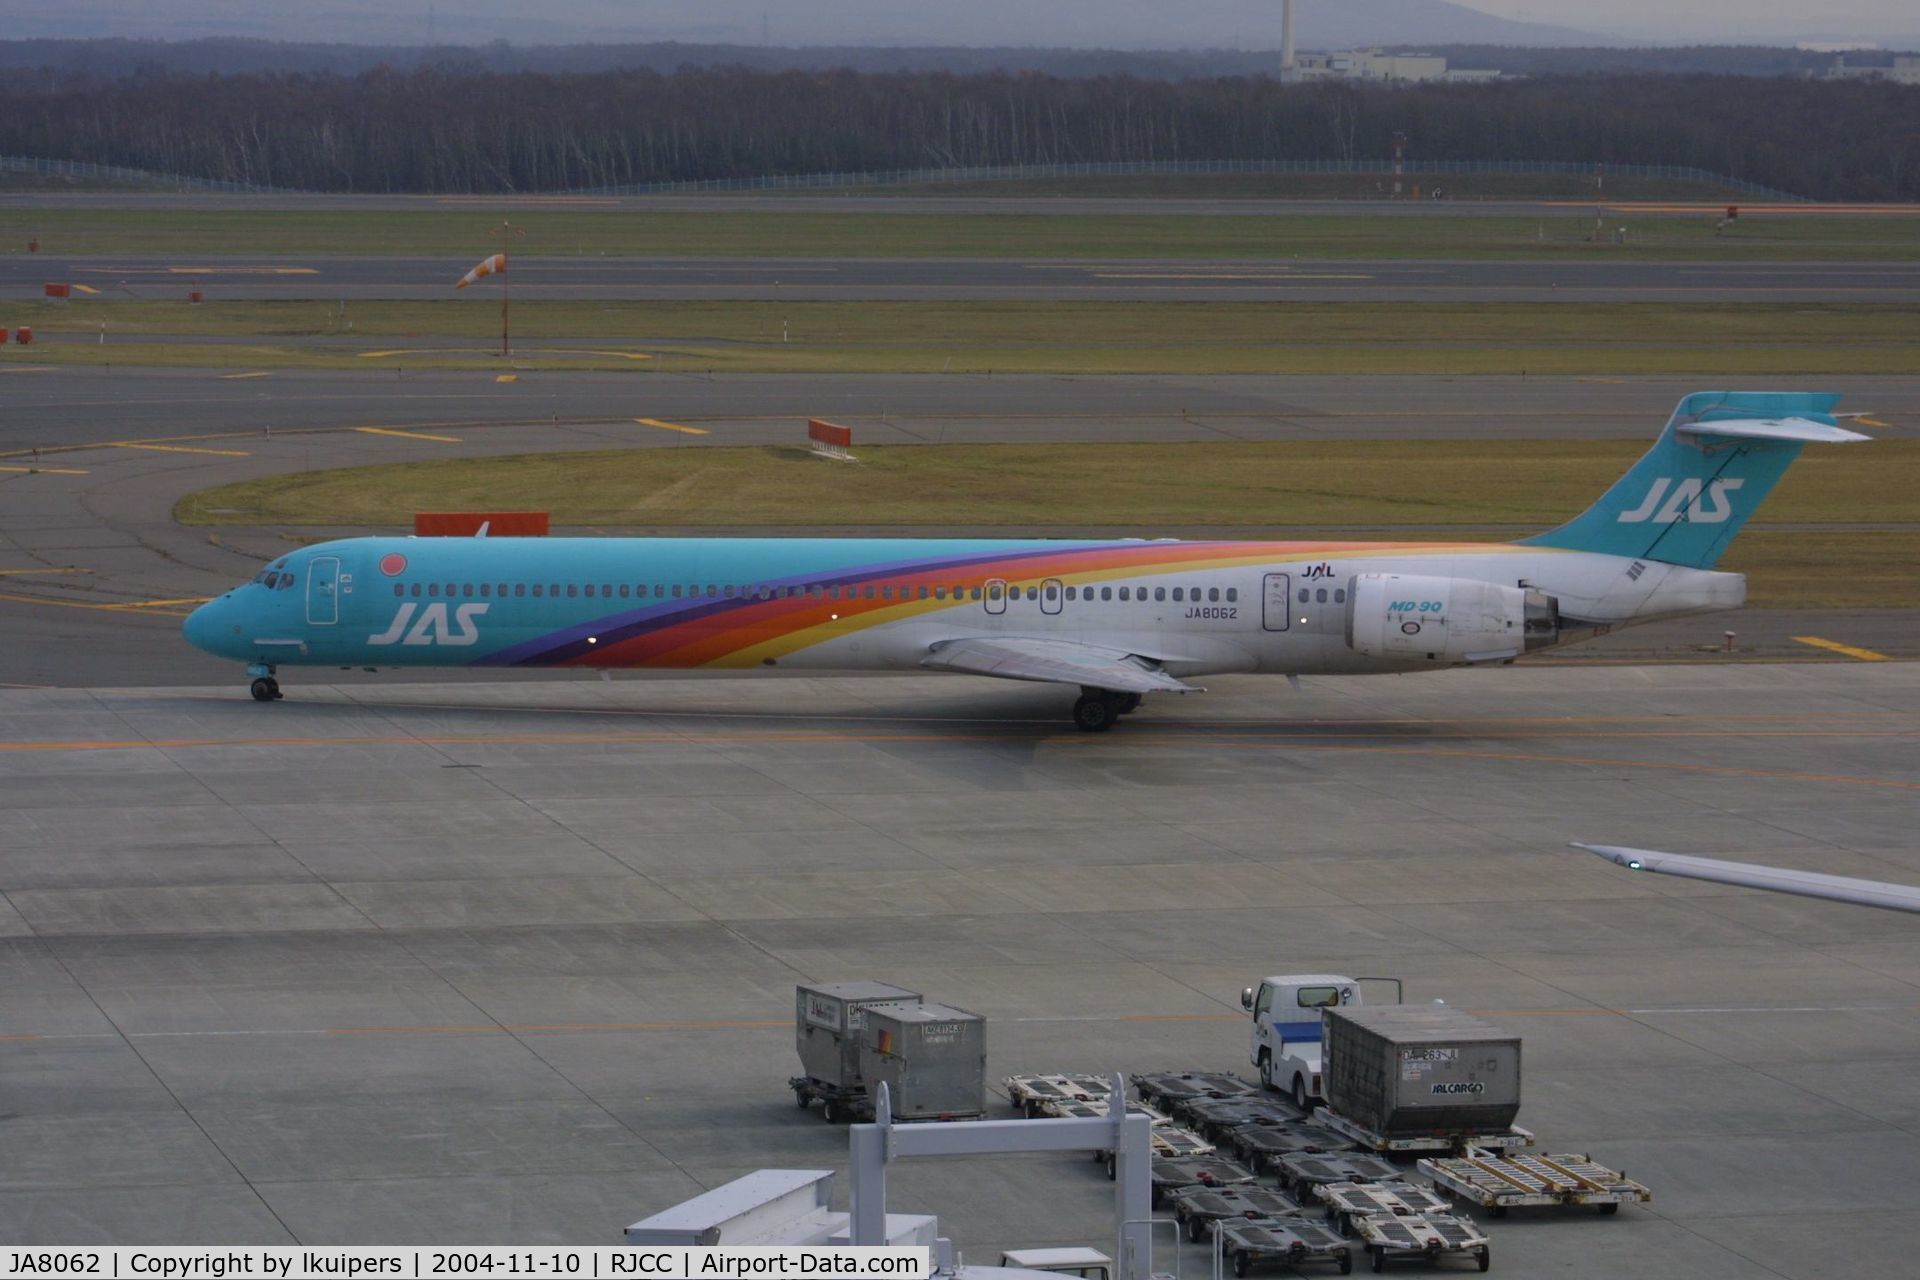 JA8062, McDonnell Douglas MD-90-30 C/N 53352, Still in the old and colourful livery of Japan Air Service, which has been taken over by JAL some time ago.